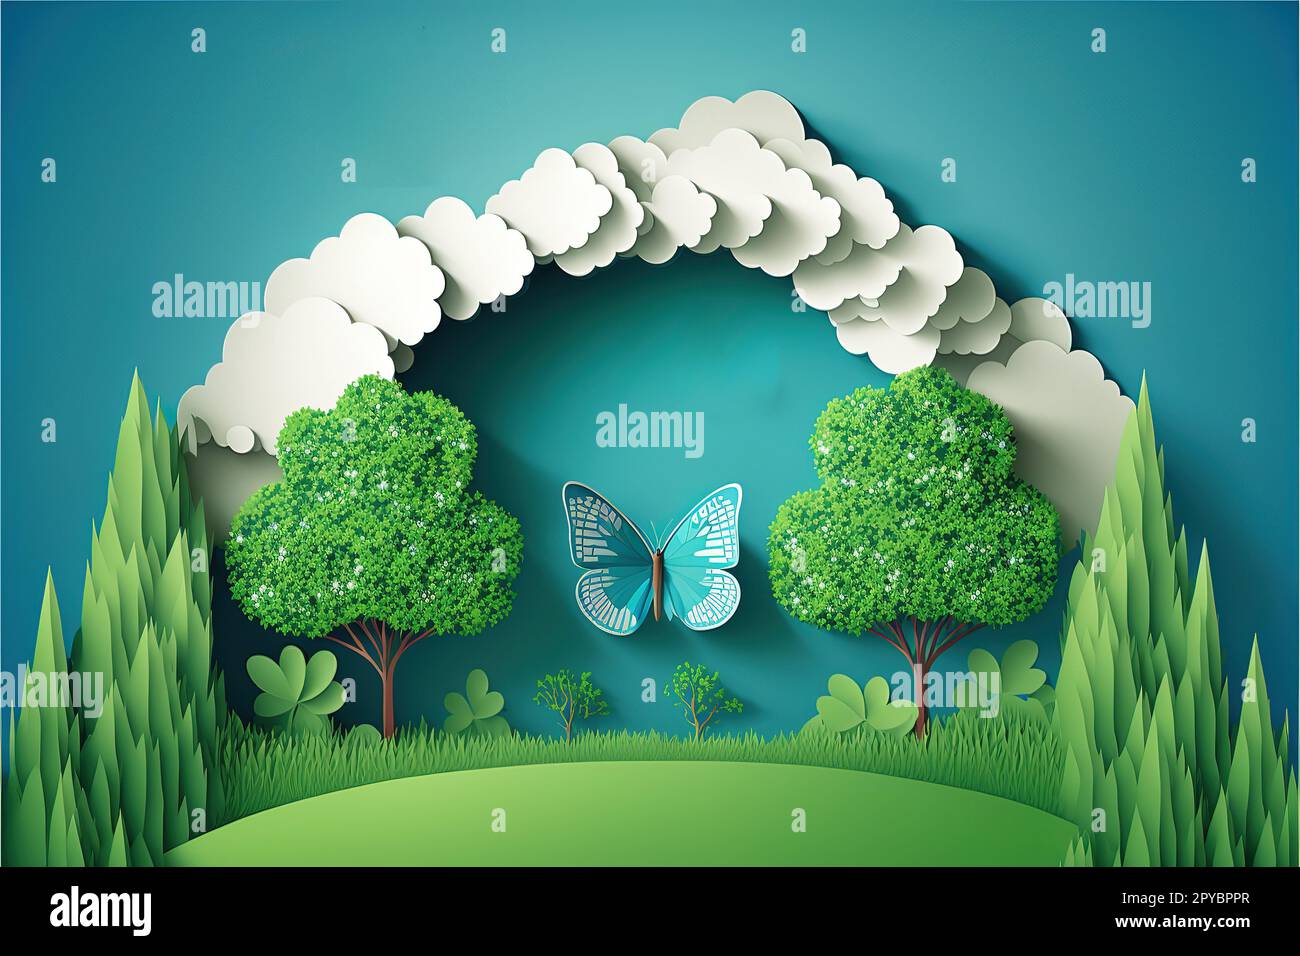 Beautiful fluffy cloud, blue sky background, summer sun, butterfly, green grass lawn, paper cut tree. Vector illustration. Eco friendly banner design, ecosystem concept Stock Photo